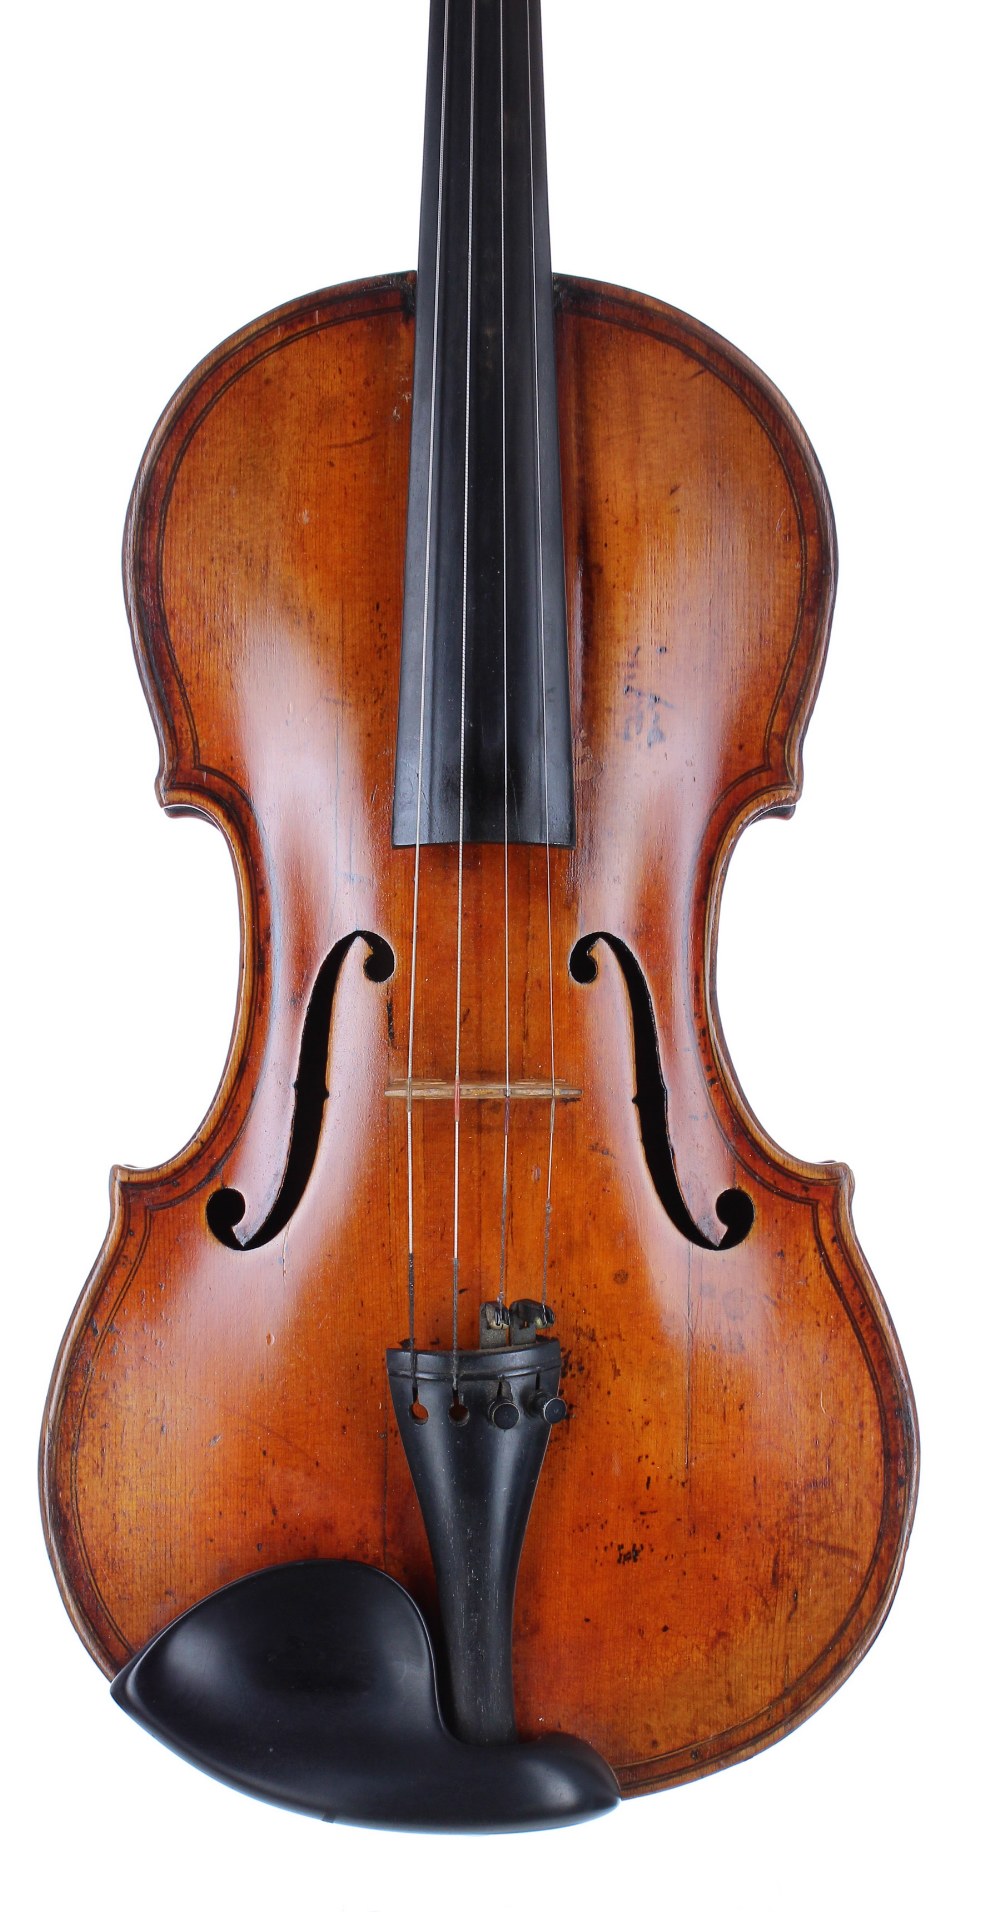 Interesting 19th century double purfled violin labelled Gio Paollo-Magini..., with further geometric